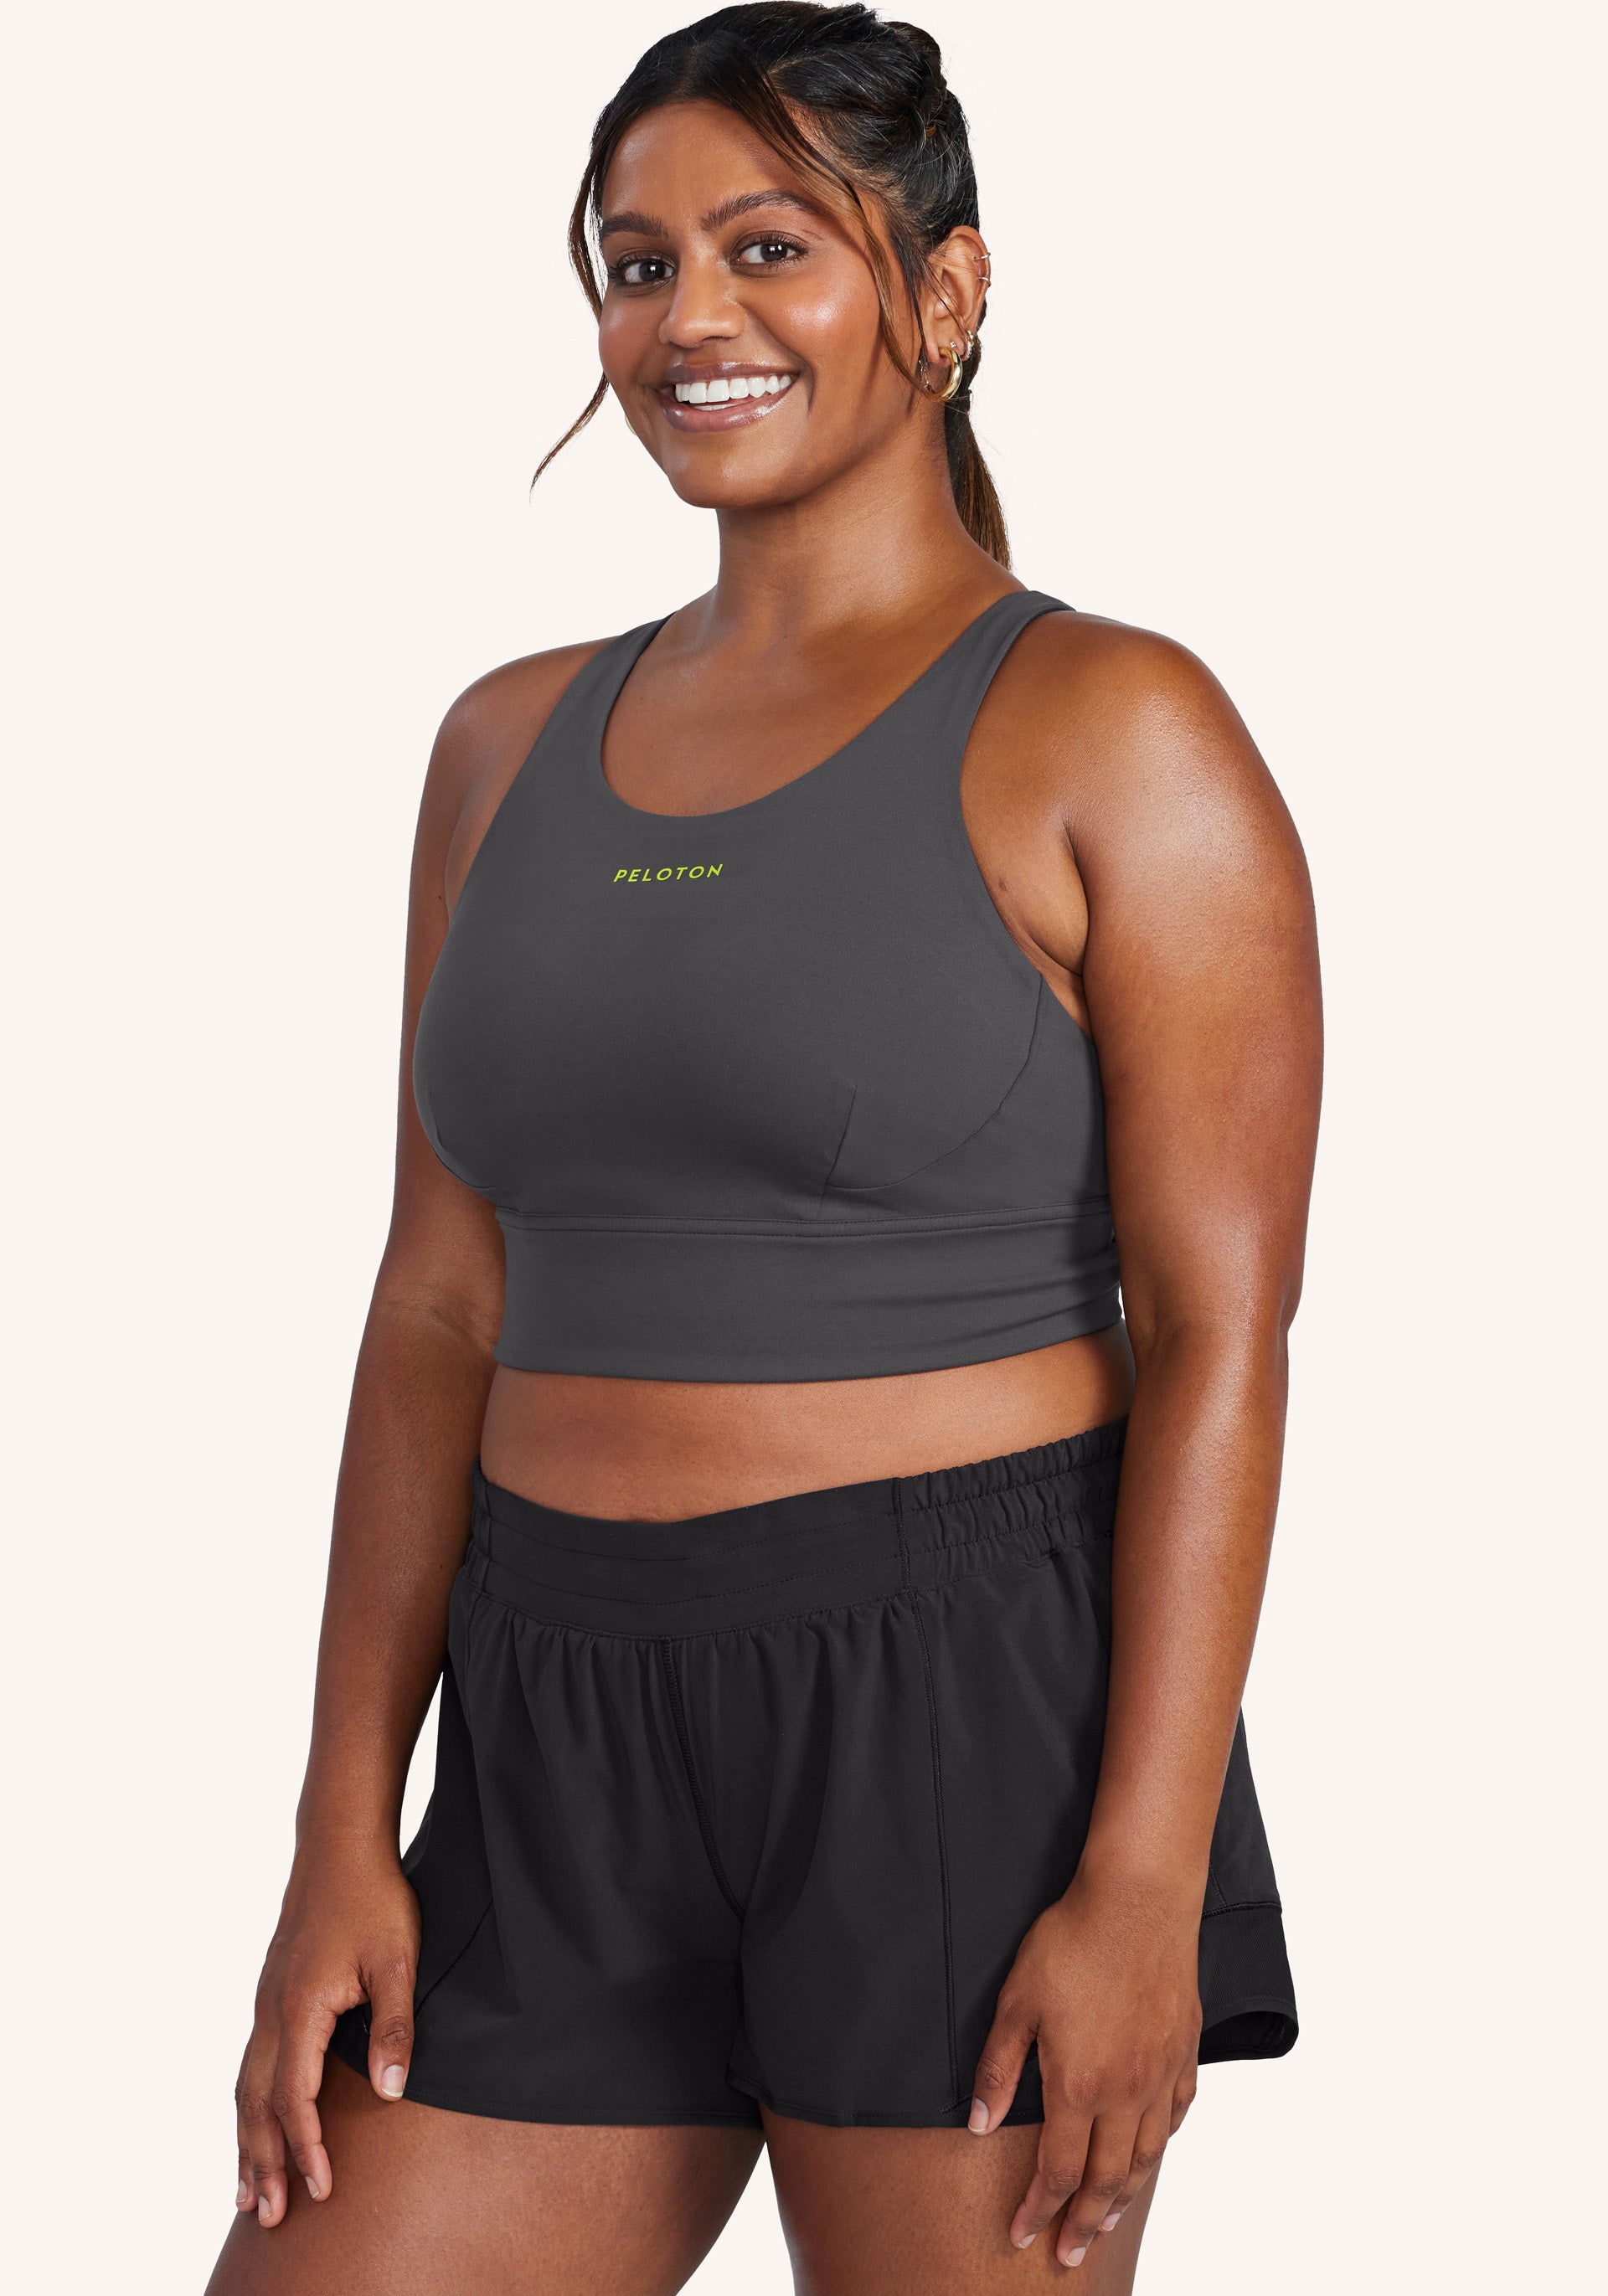 pairing the asymmetrical bra + wunder trains (ON SALE!) in roasted bro